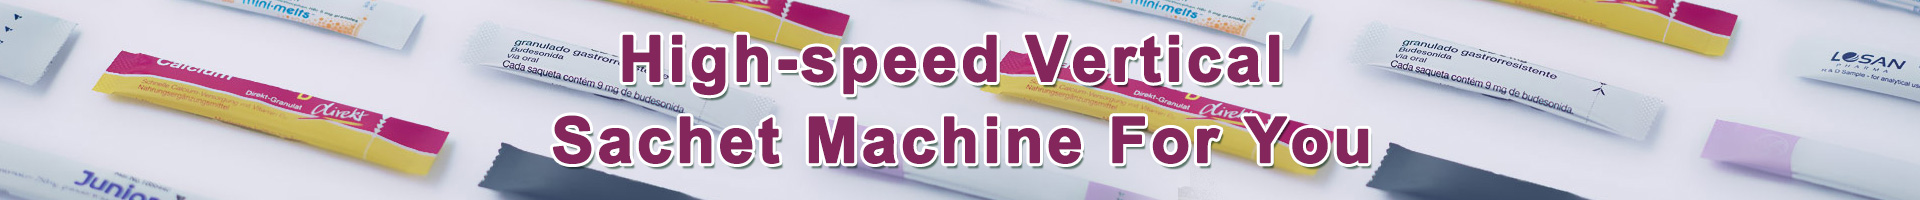 High-speed-Vertical-Sachet-Machine-For-You